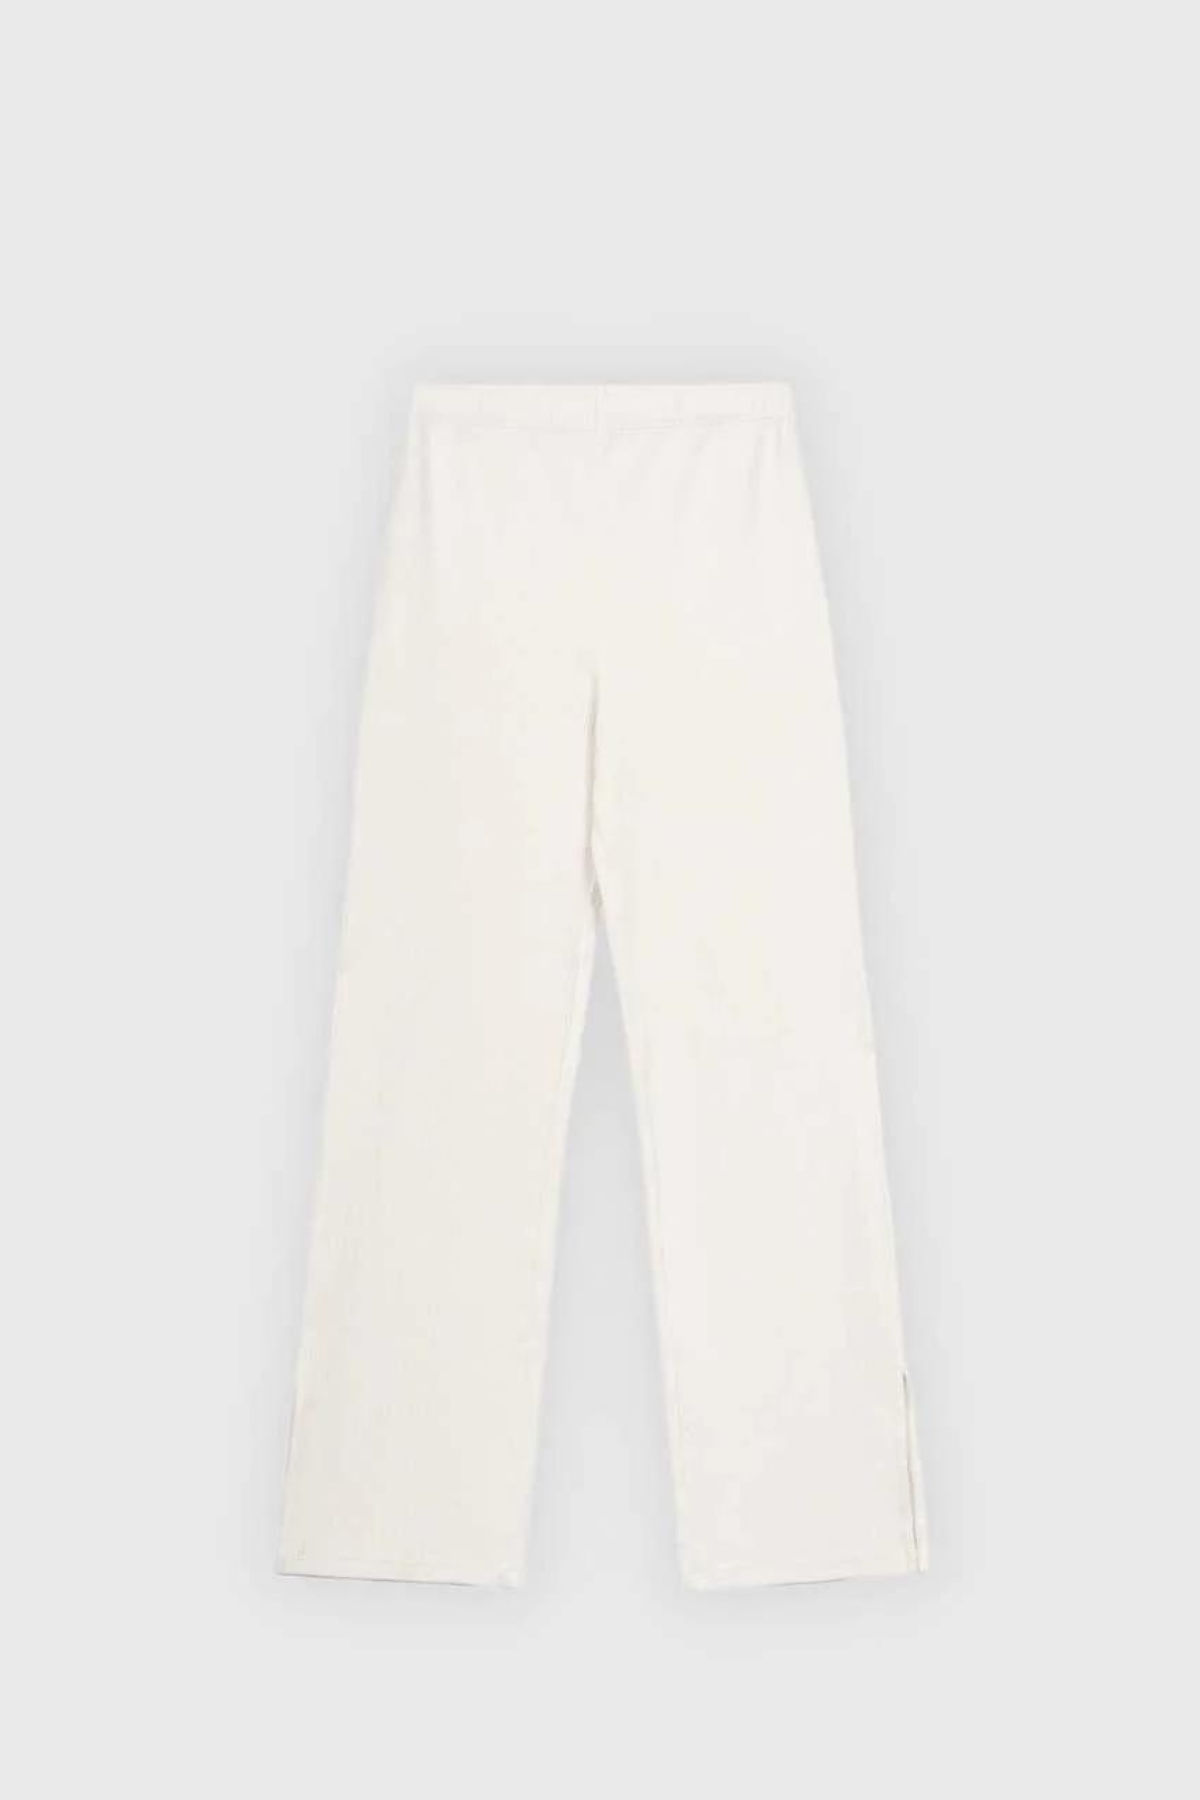 WEITE GERIPPTE HOSE "FLOWY PANTS" - SYNCSON 